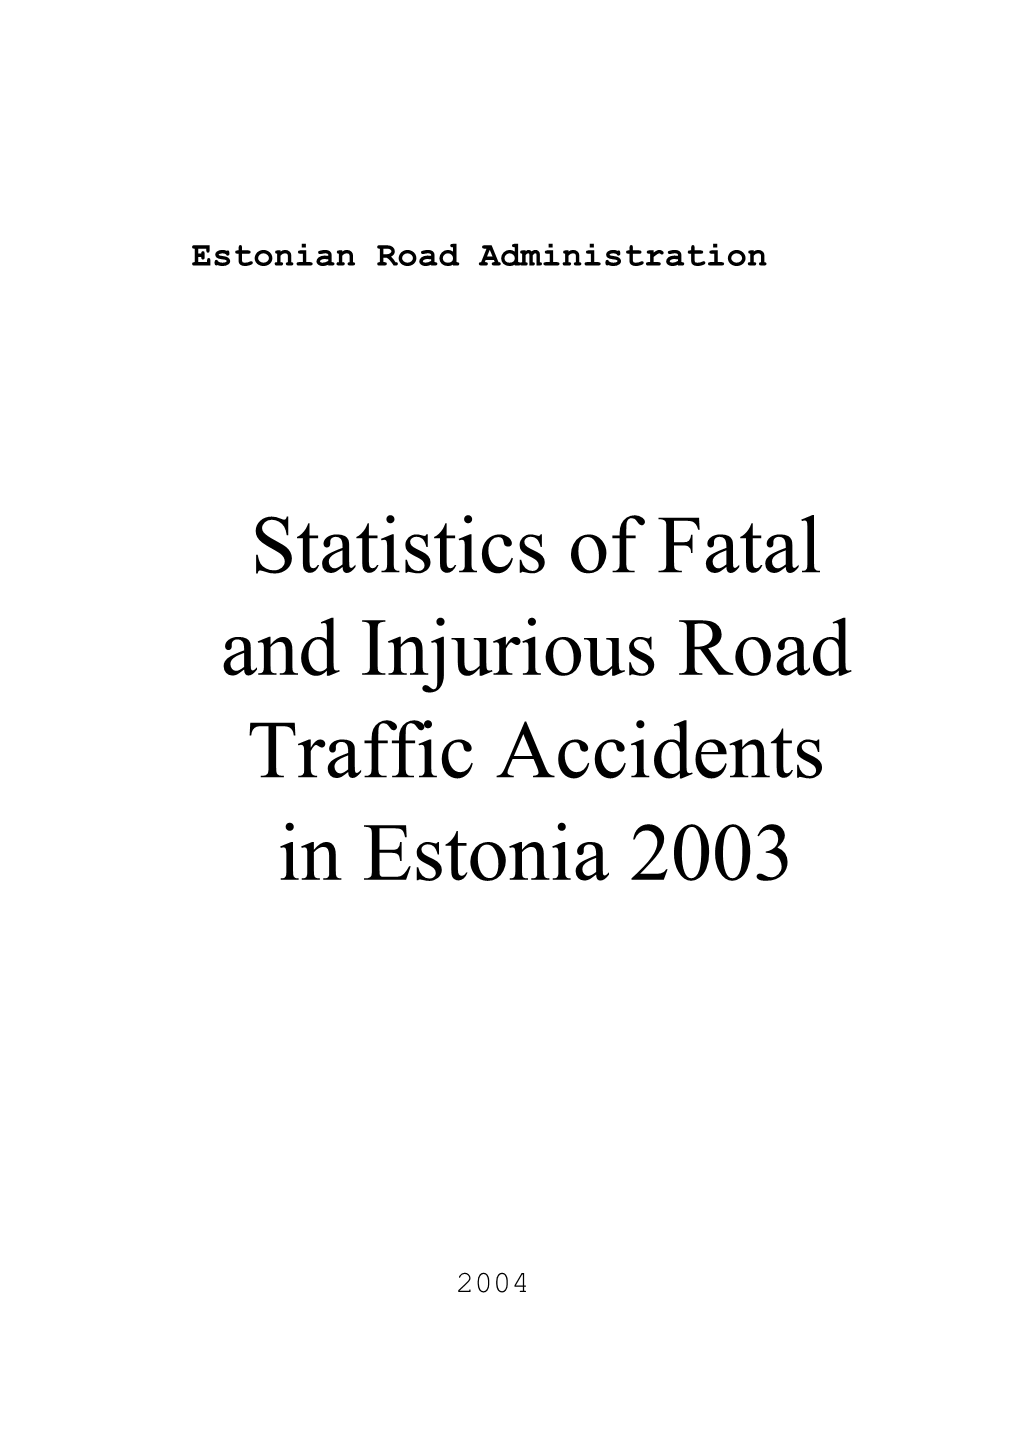 In Estonia 2003 Traffic Accidents and Injurious Road Statistics of Fatal